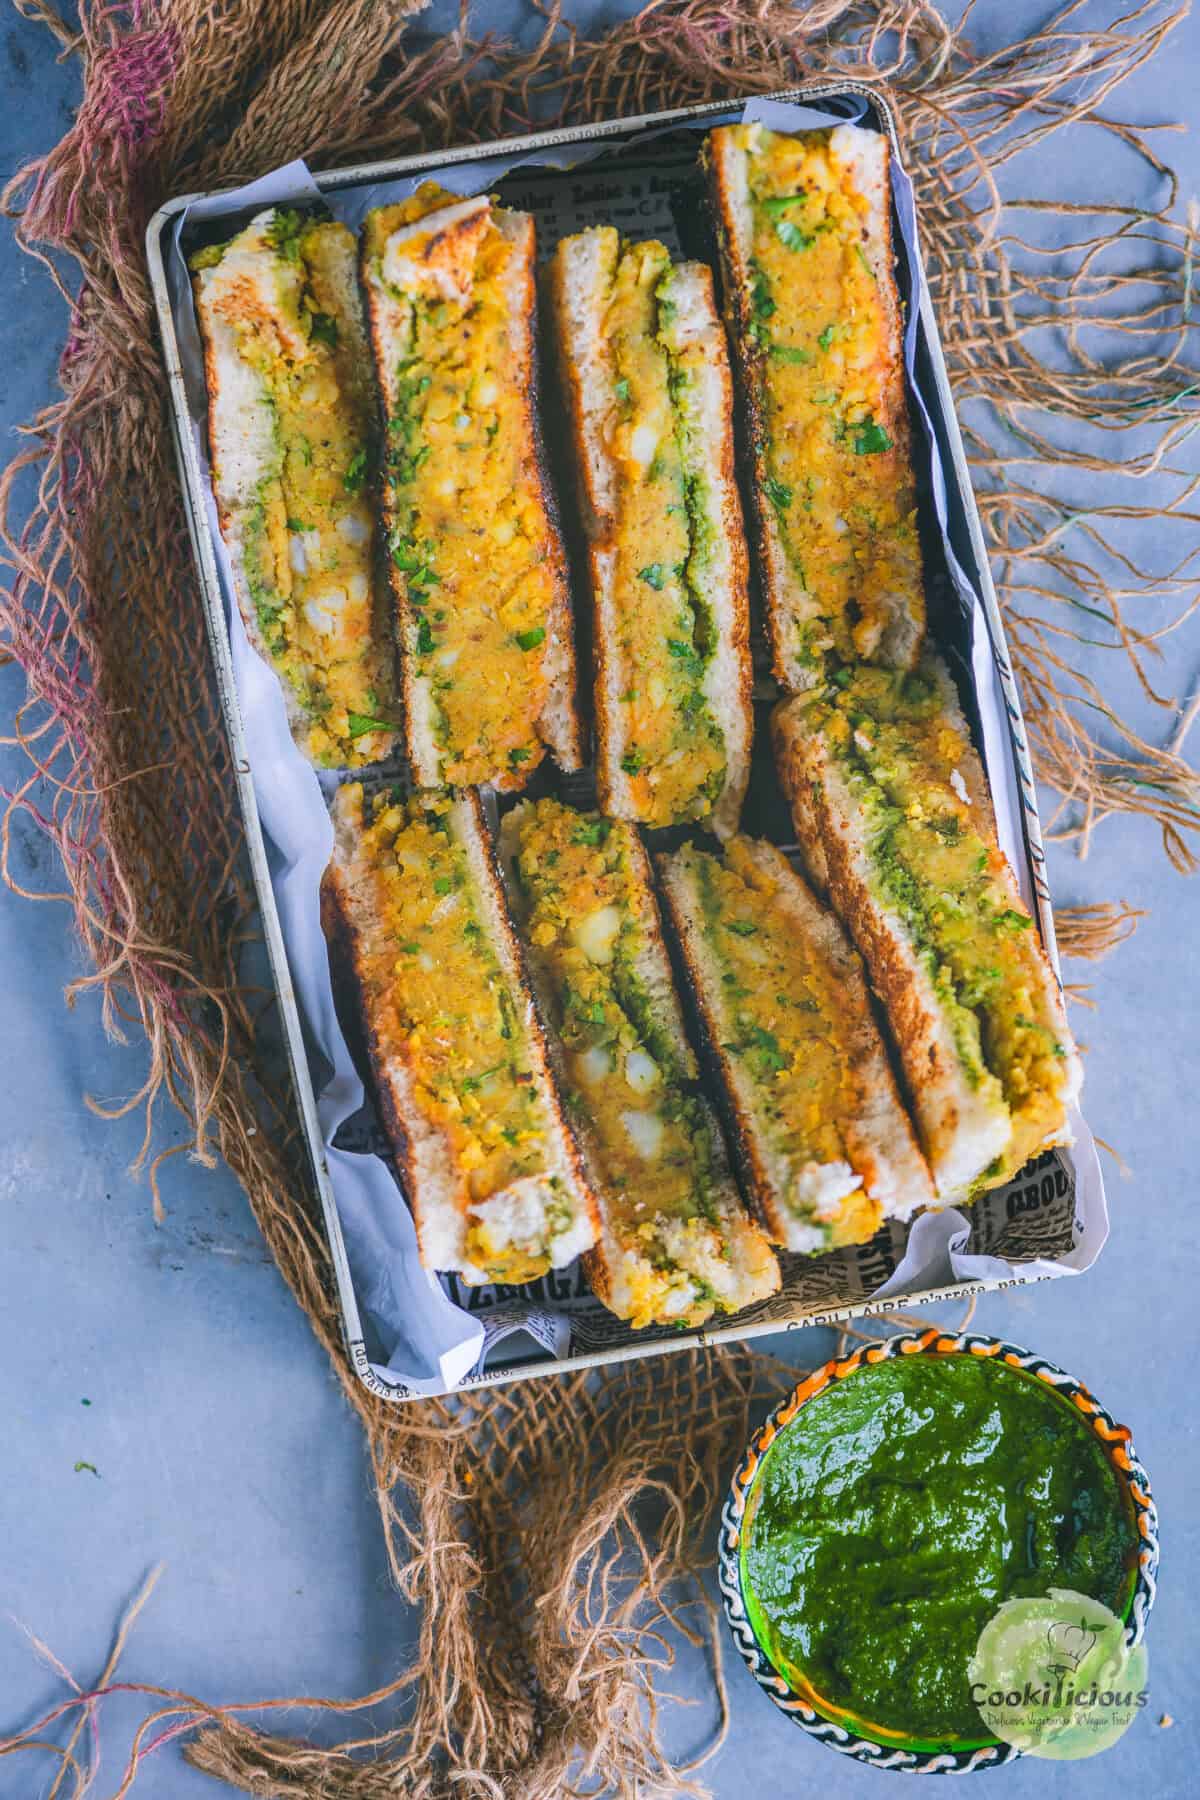 Aloo toast cut in triangles and served in a tray with green chutney on the side.